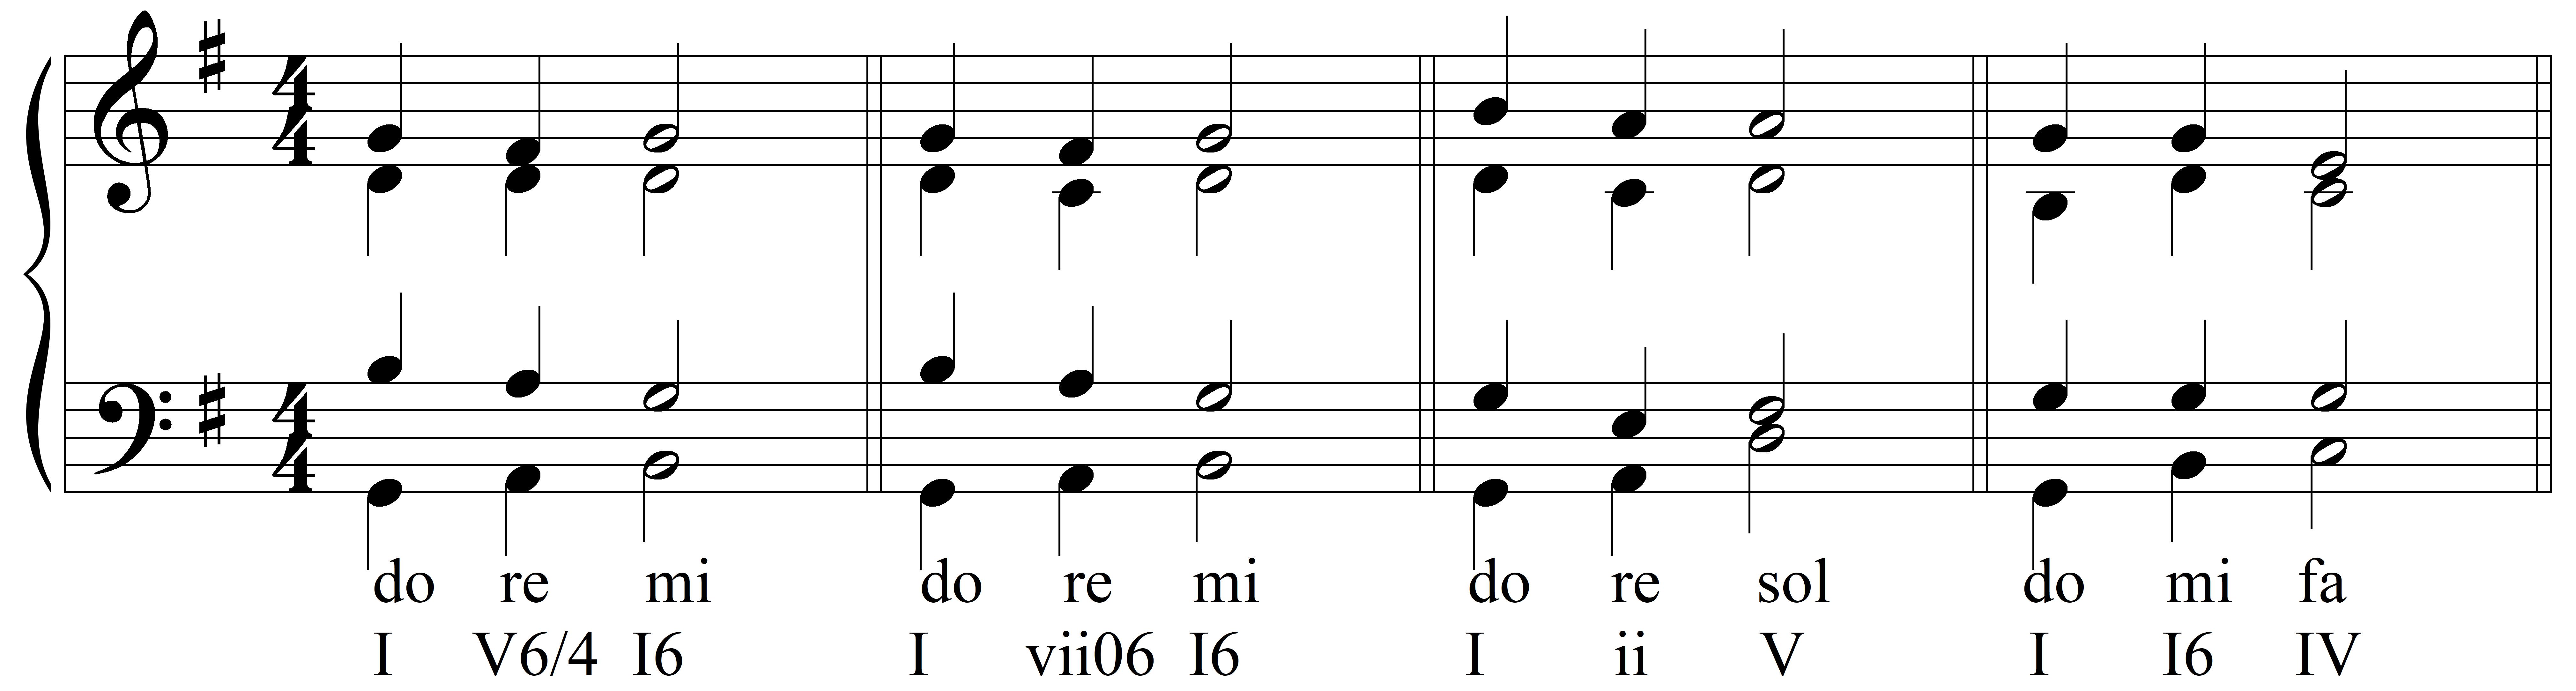 ii analyzing seventh chords in musical contexts